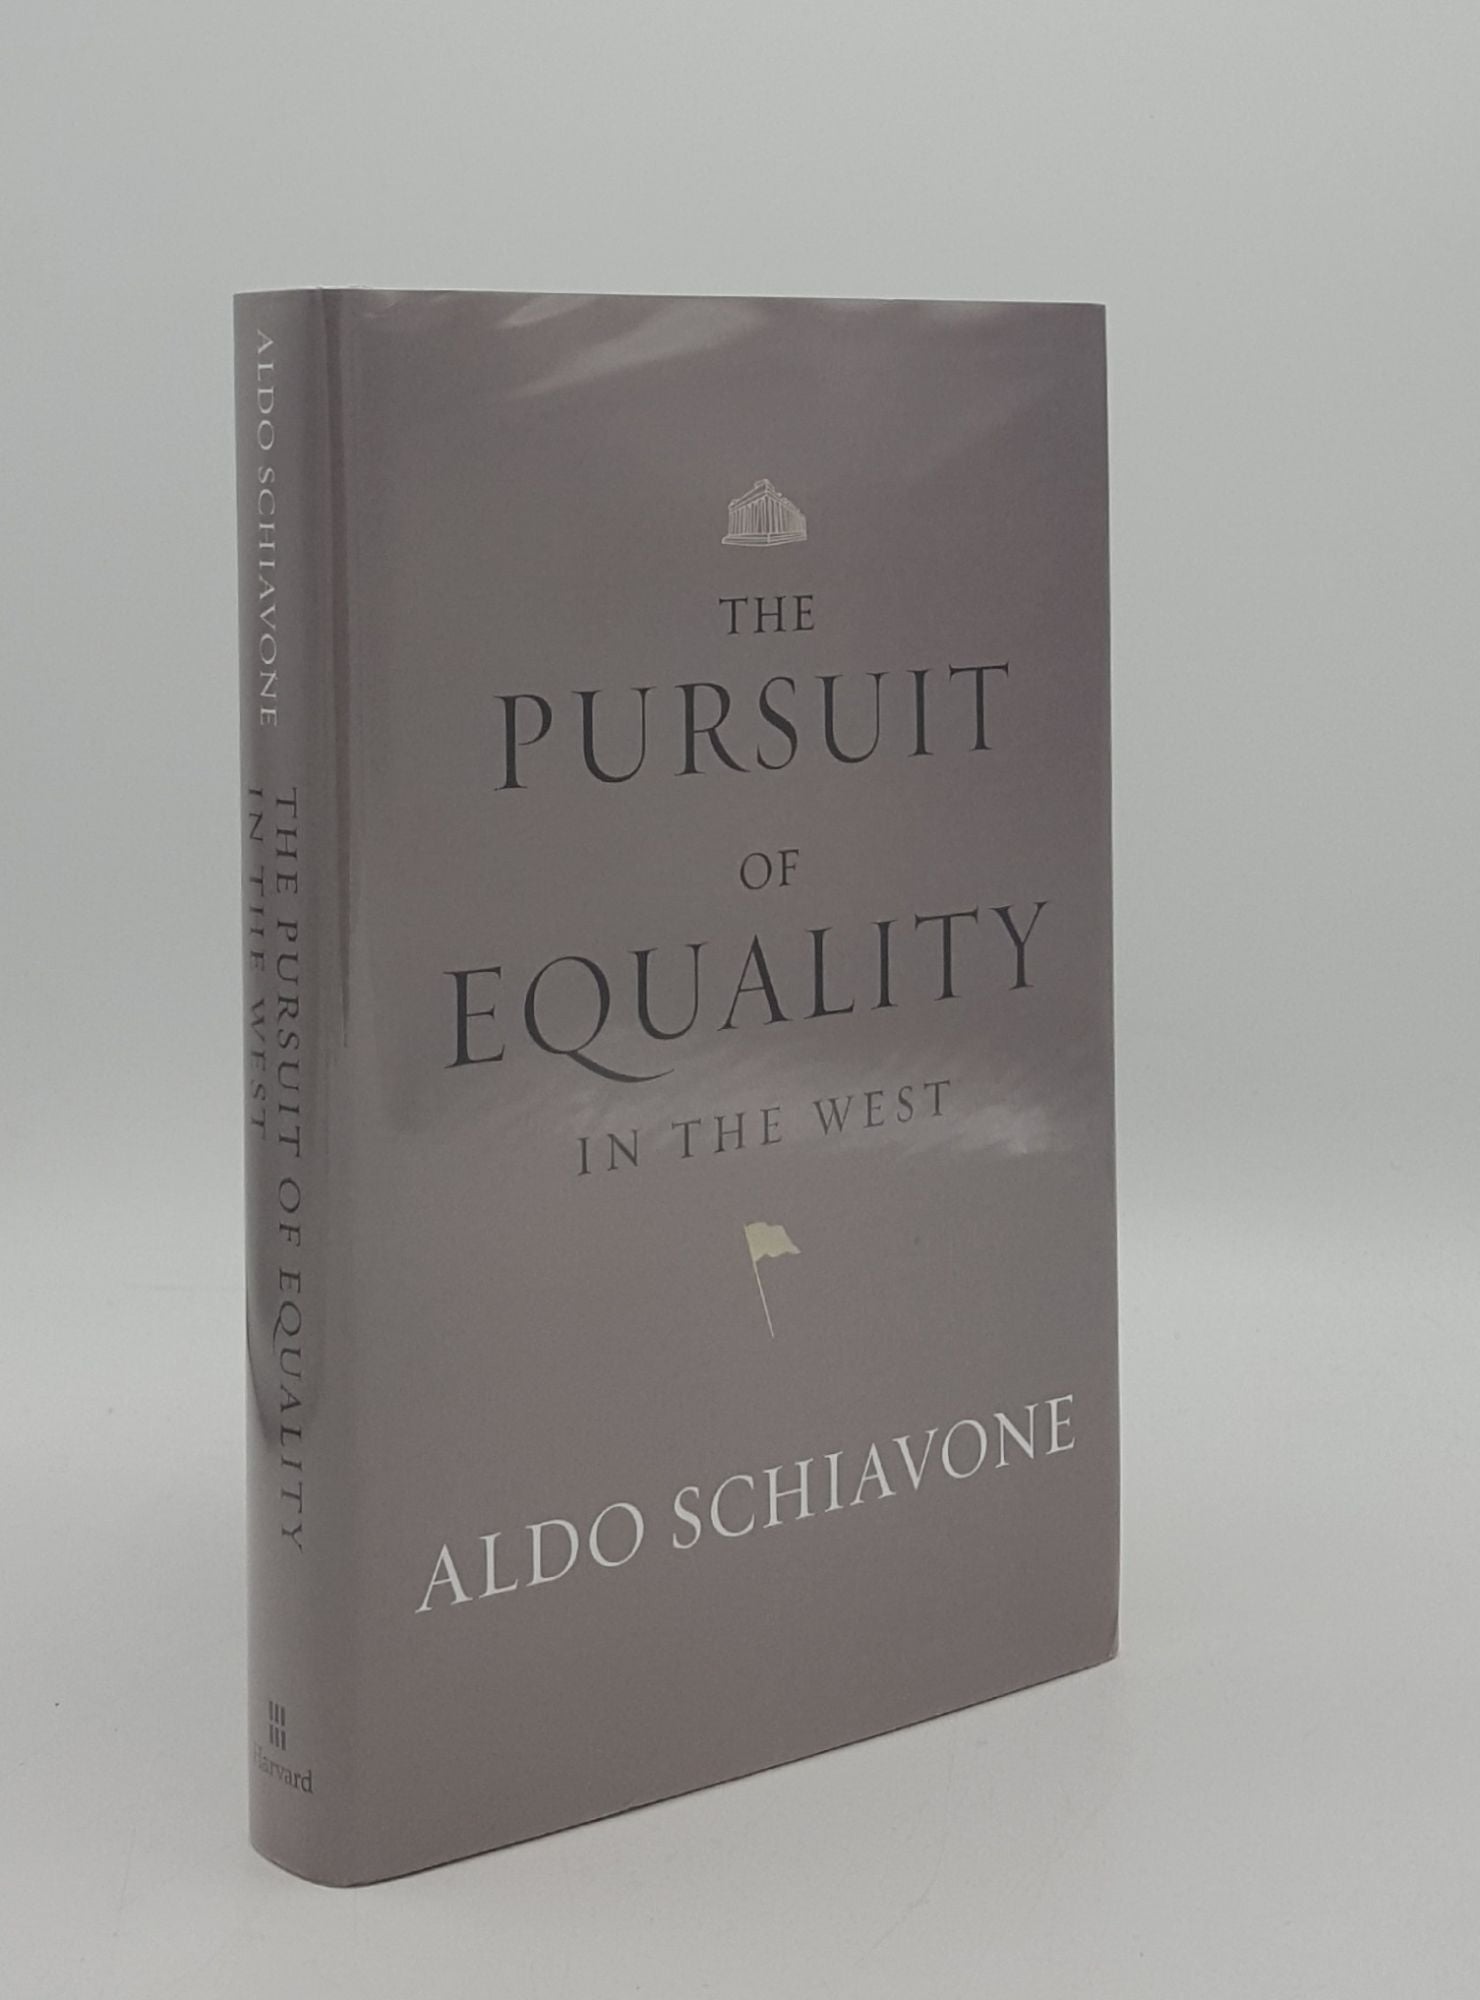 SCHIAVONE Aldo - The Pursuit of Equality in the West